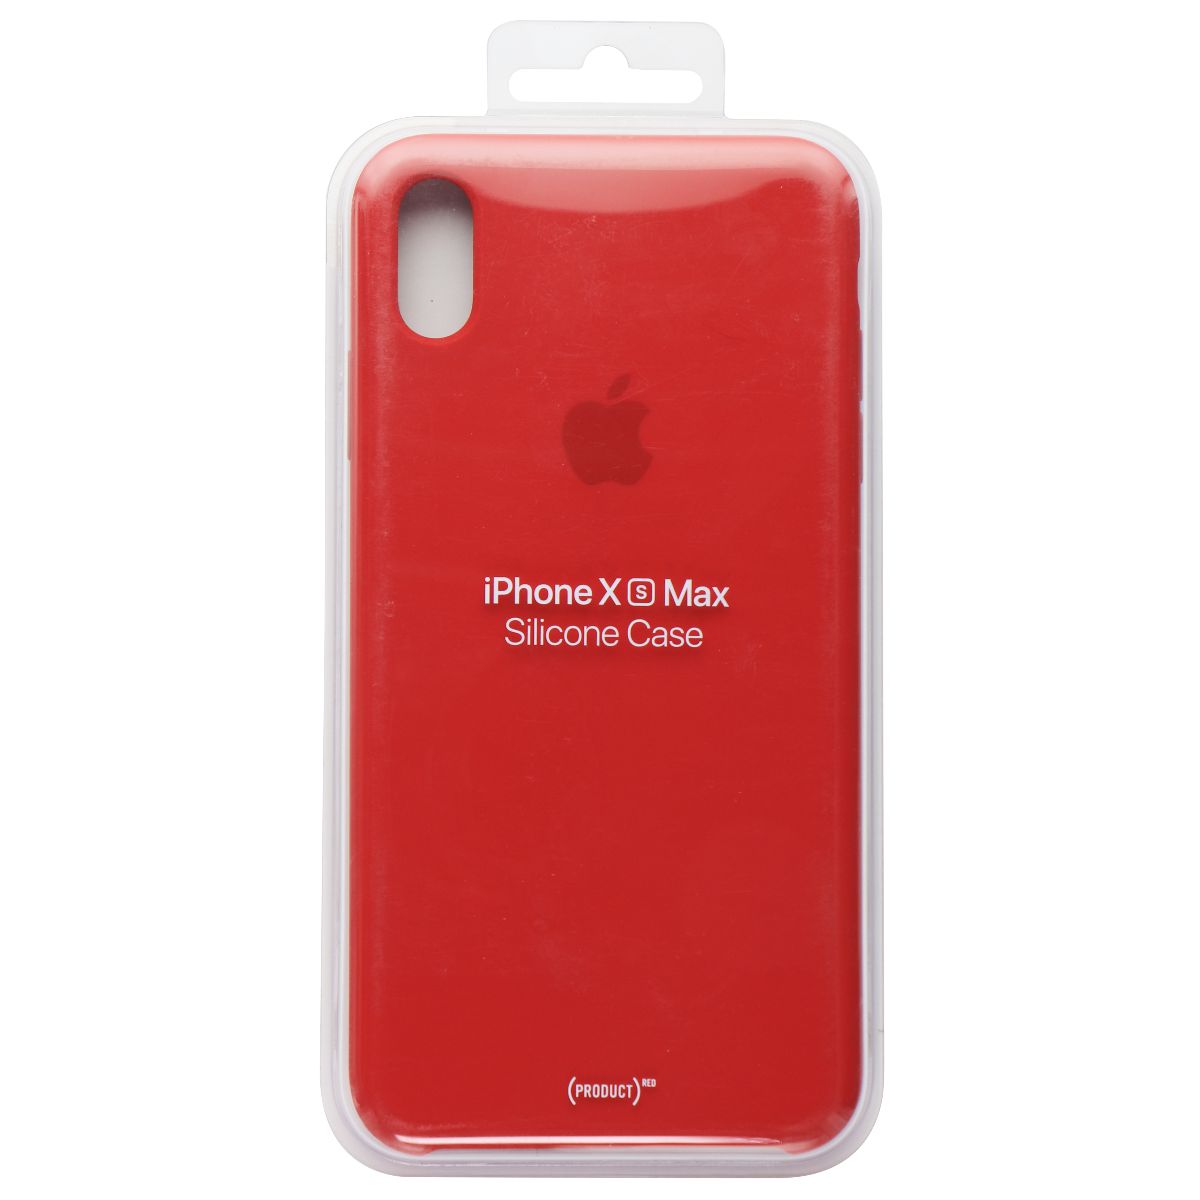 Apple Official Silicone Case for Apple iPhone Xs Max - Red (MRWH2ZM/A)